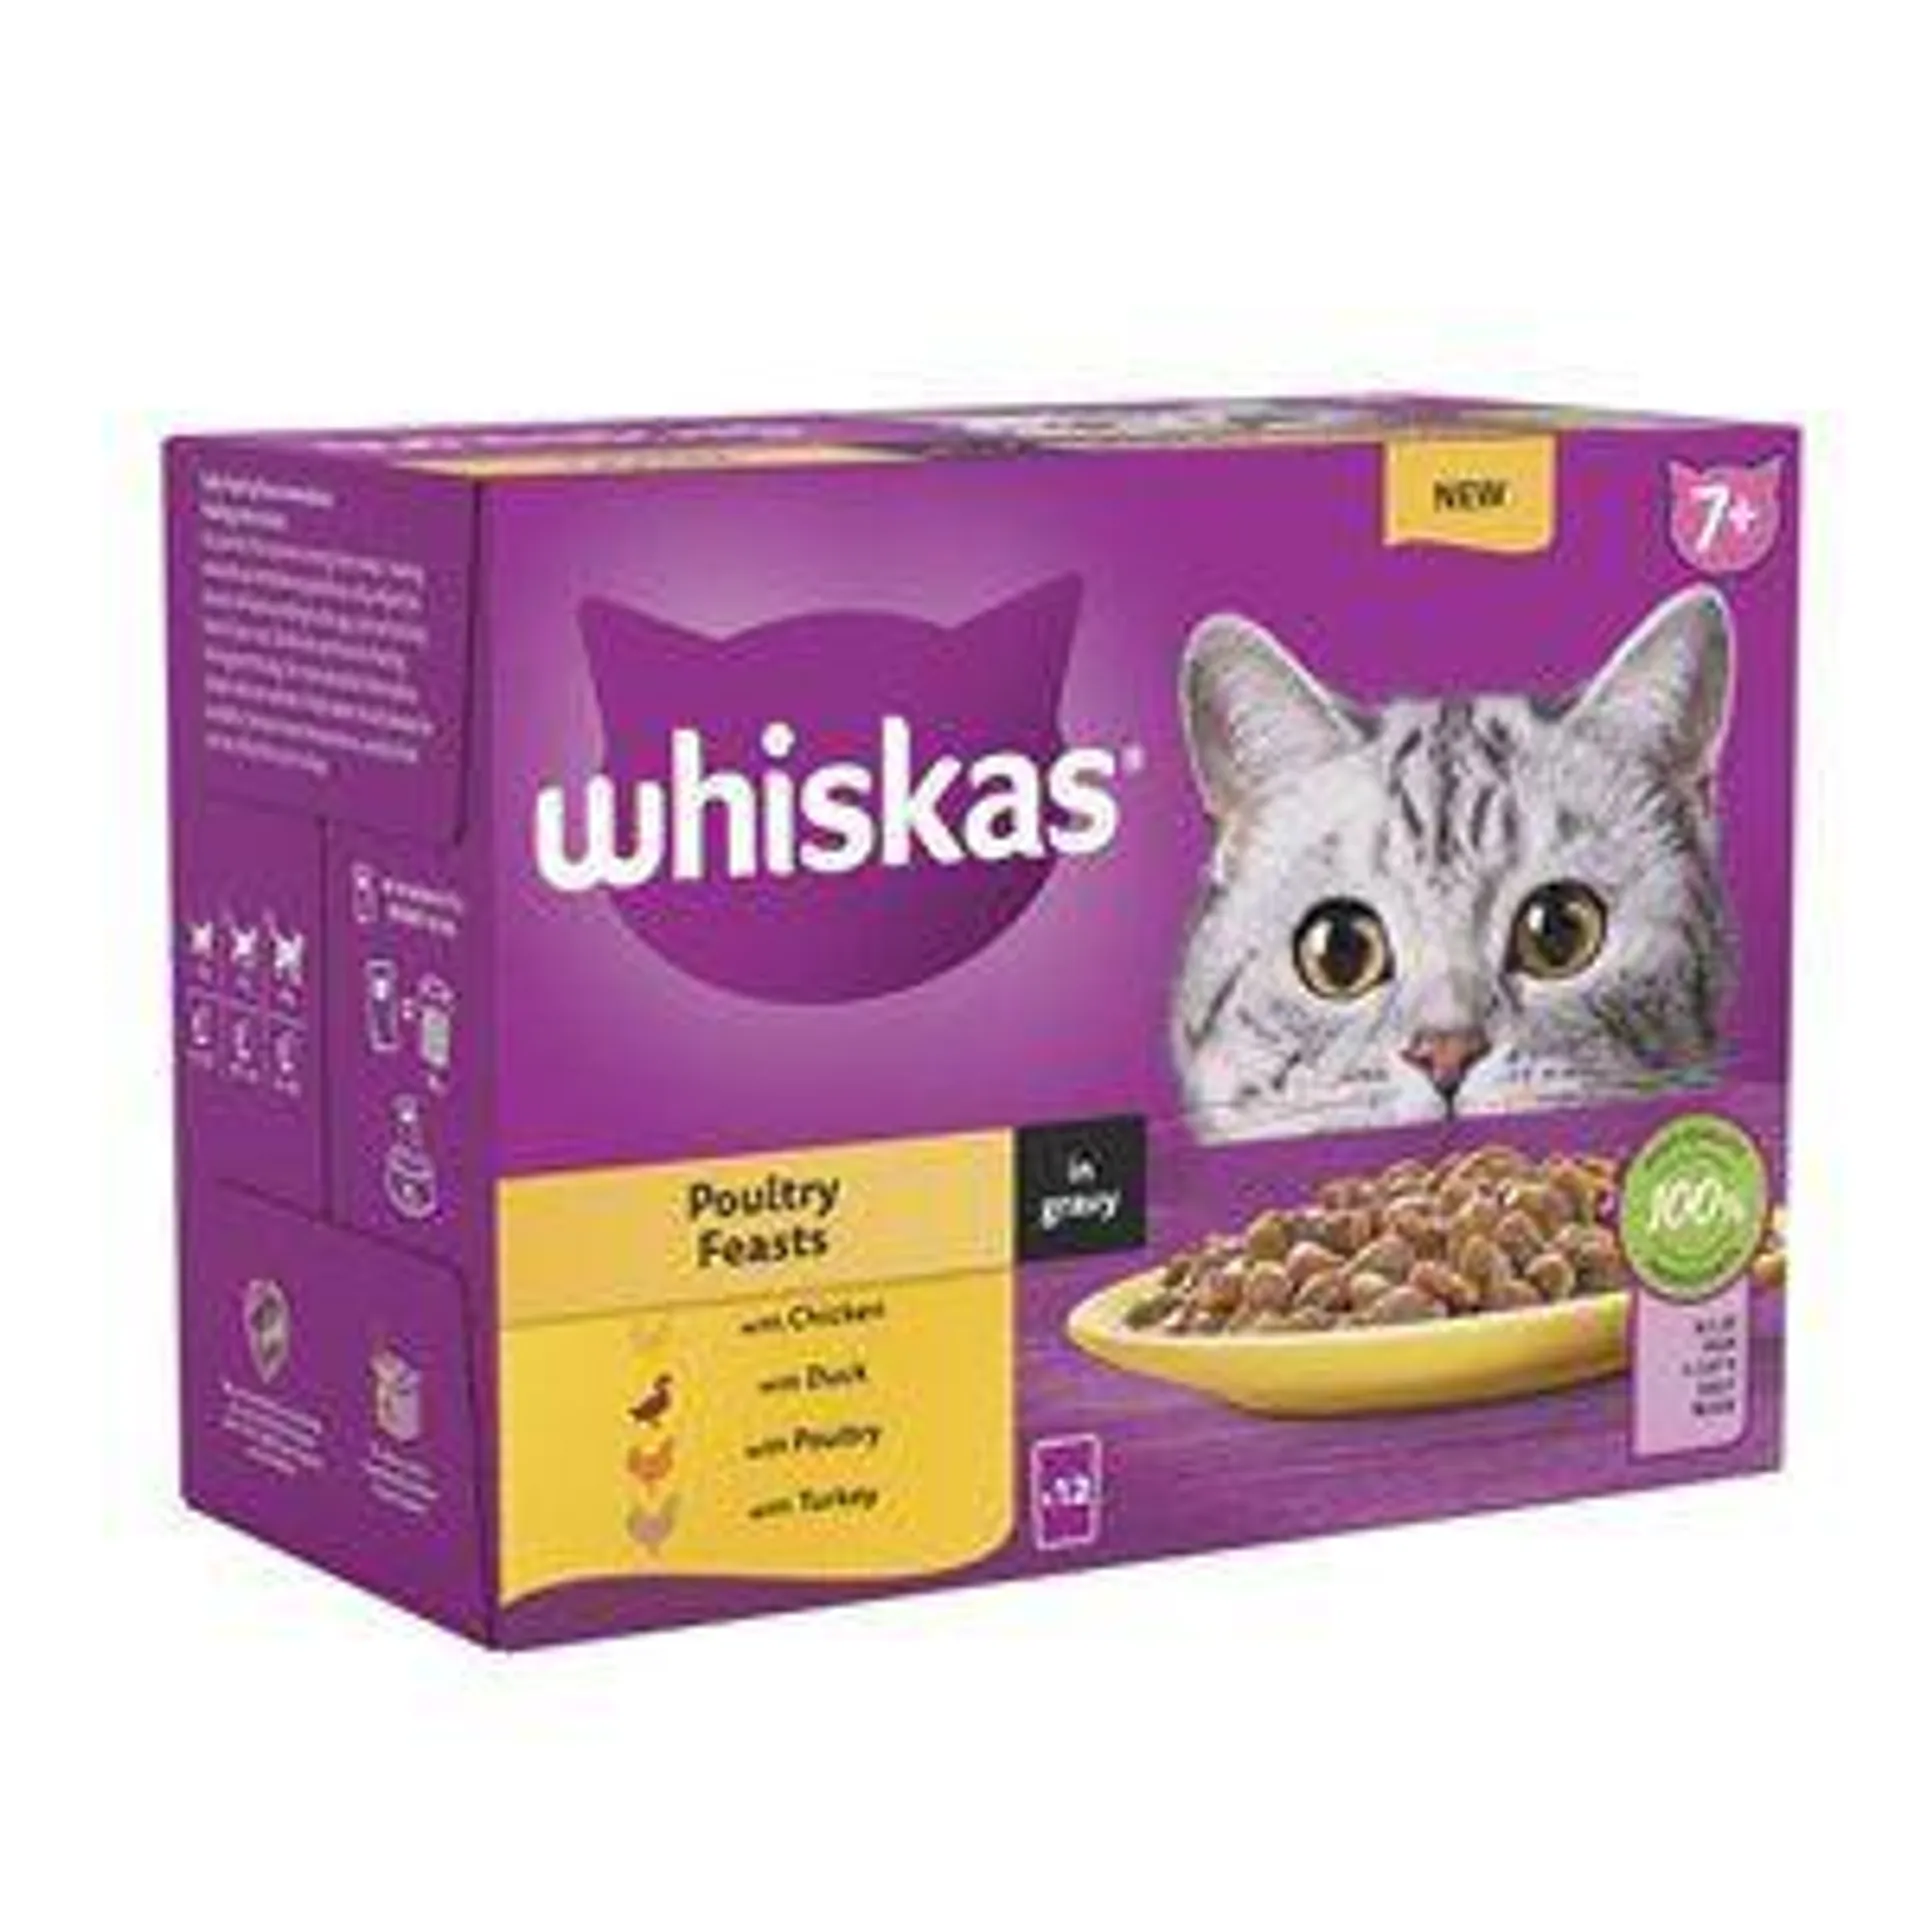 Whiskas 7+ Poultry Feasts In Gravy Multipack